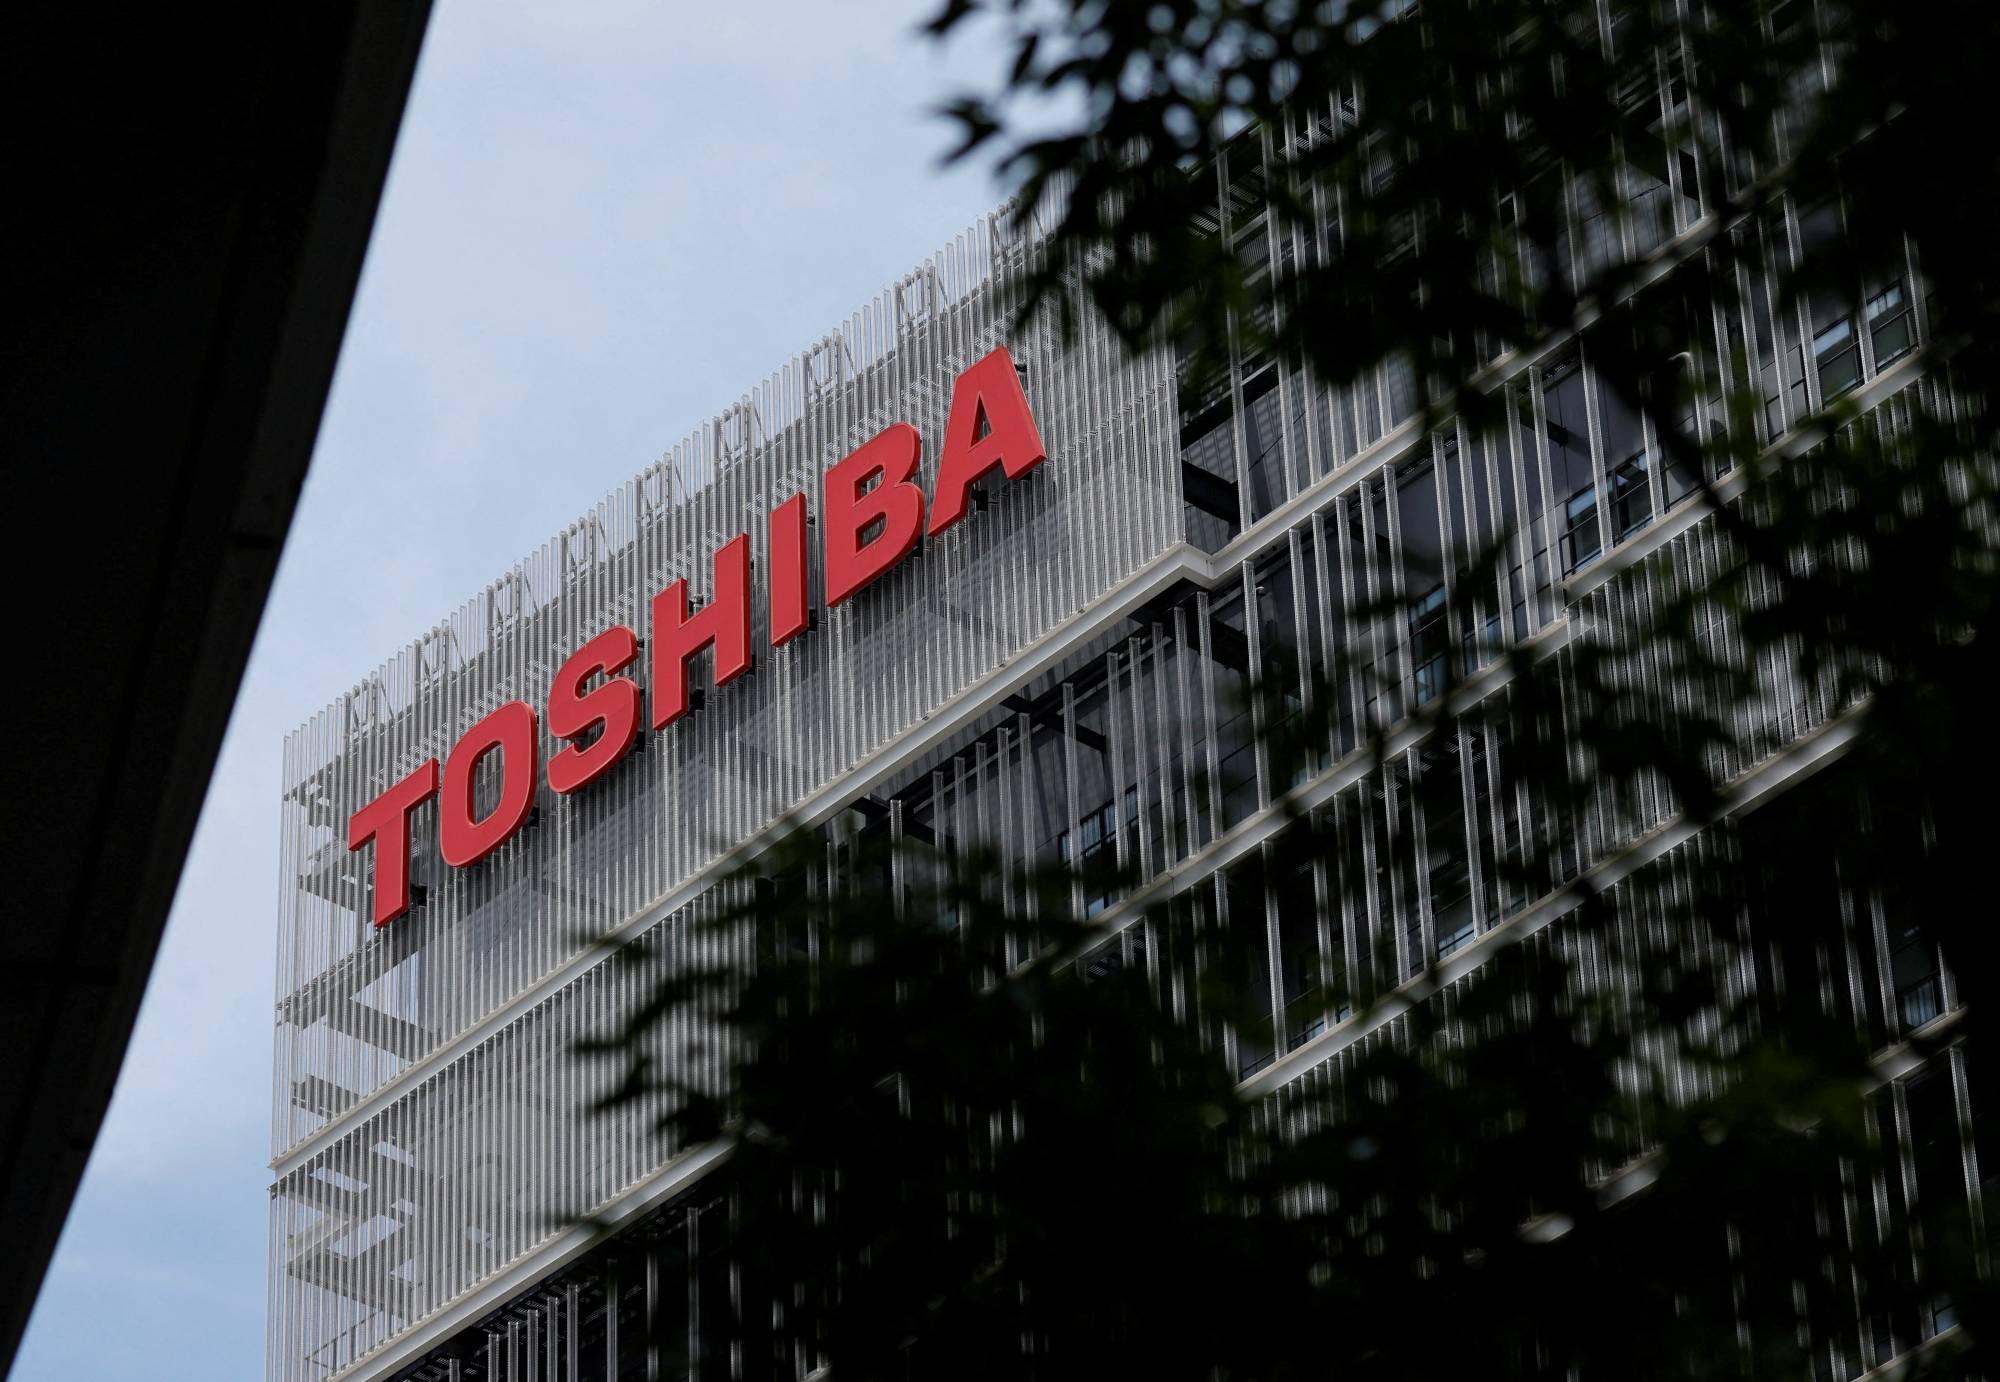 The Tokyo District Court on Tuesday found five former Toshiba executives liable for compensation over accounting irregularities. | REUTERS